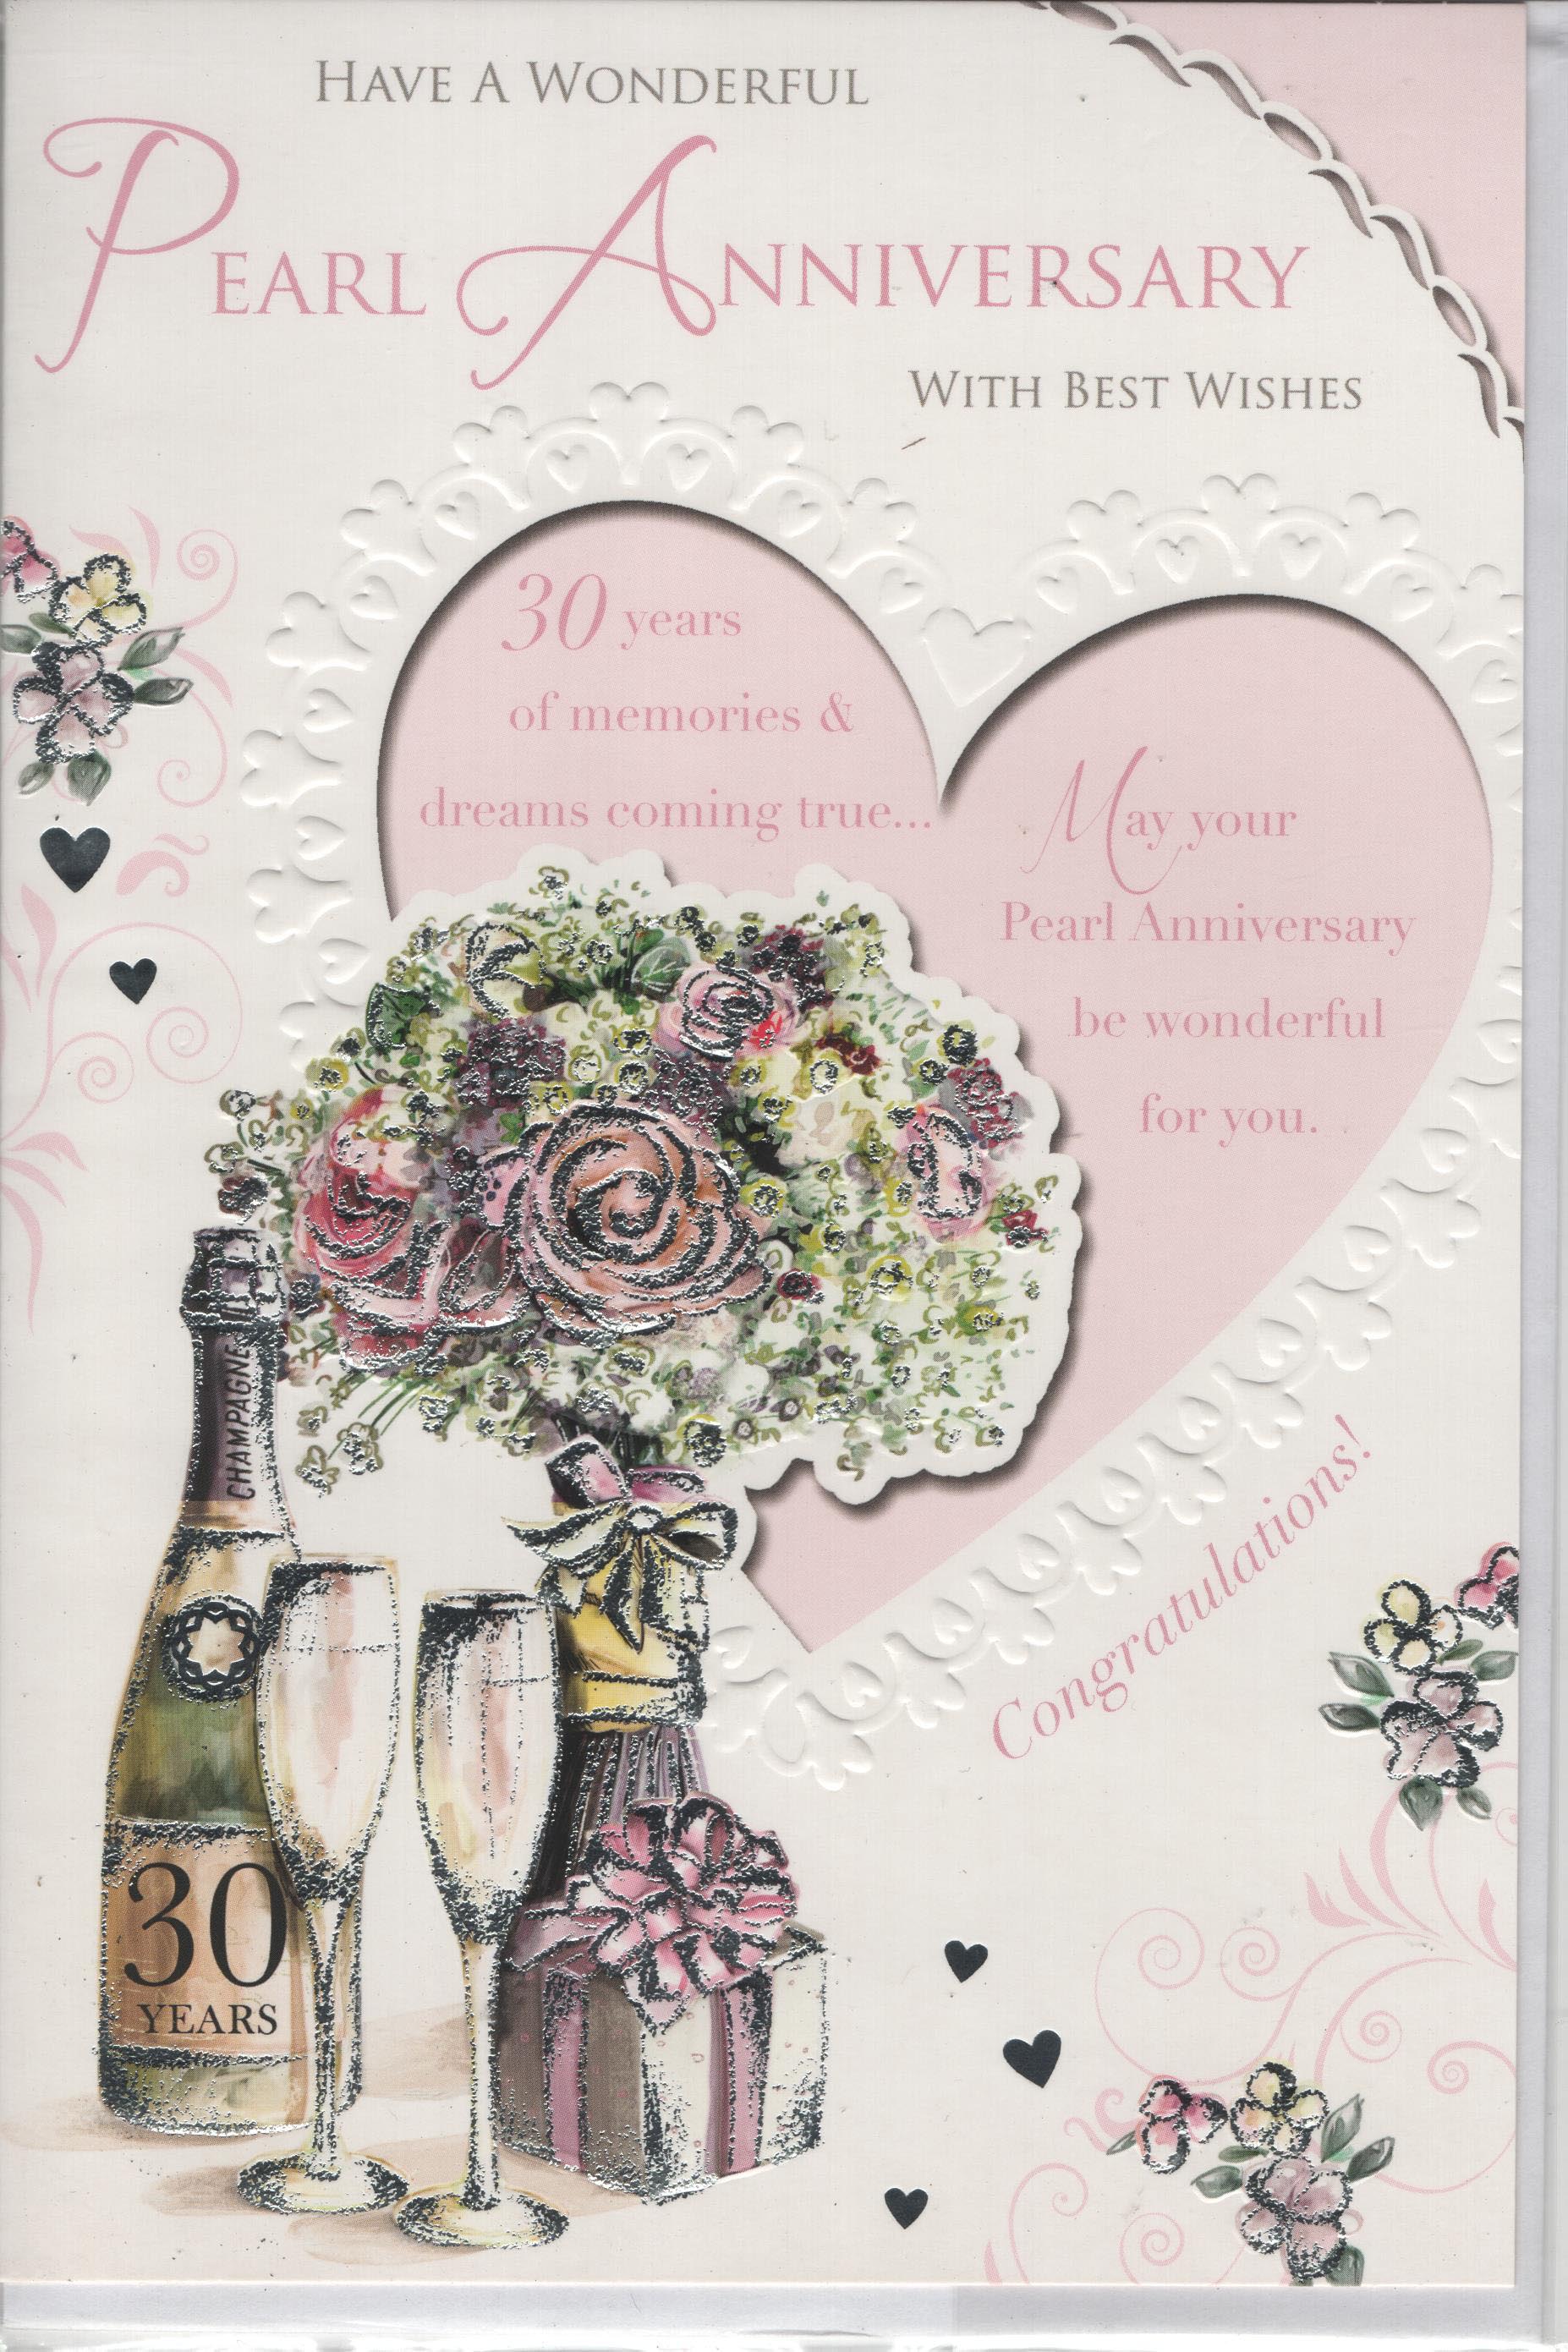 XPress Yourself Greeting Cards - Have A Wonderful Pearl Anniversary with Best Wishes 